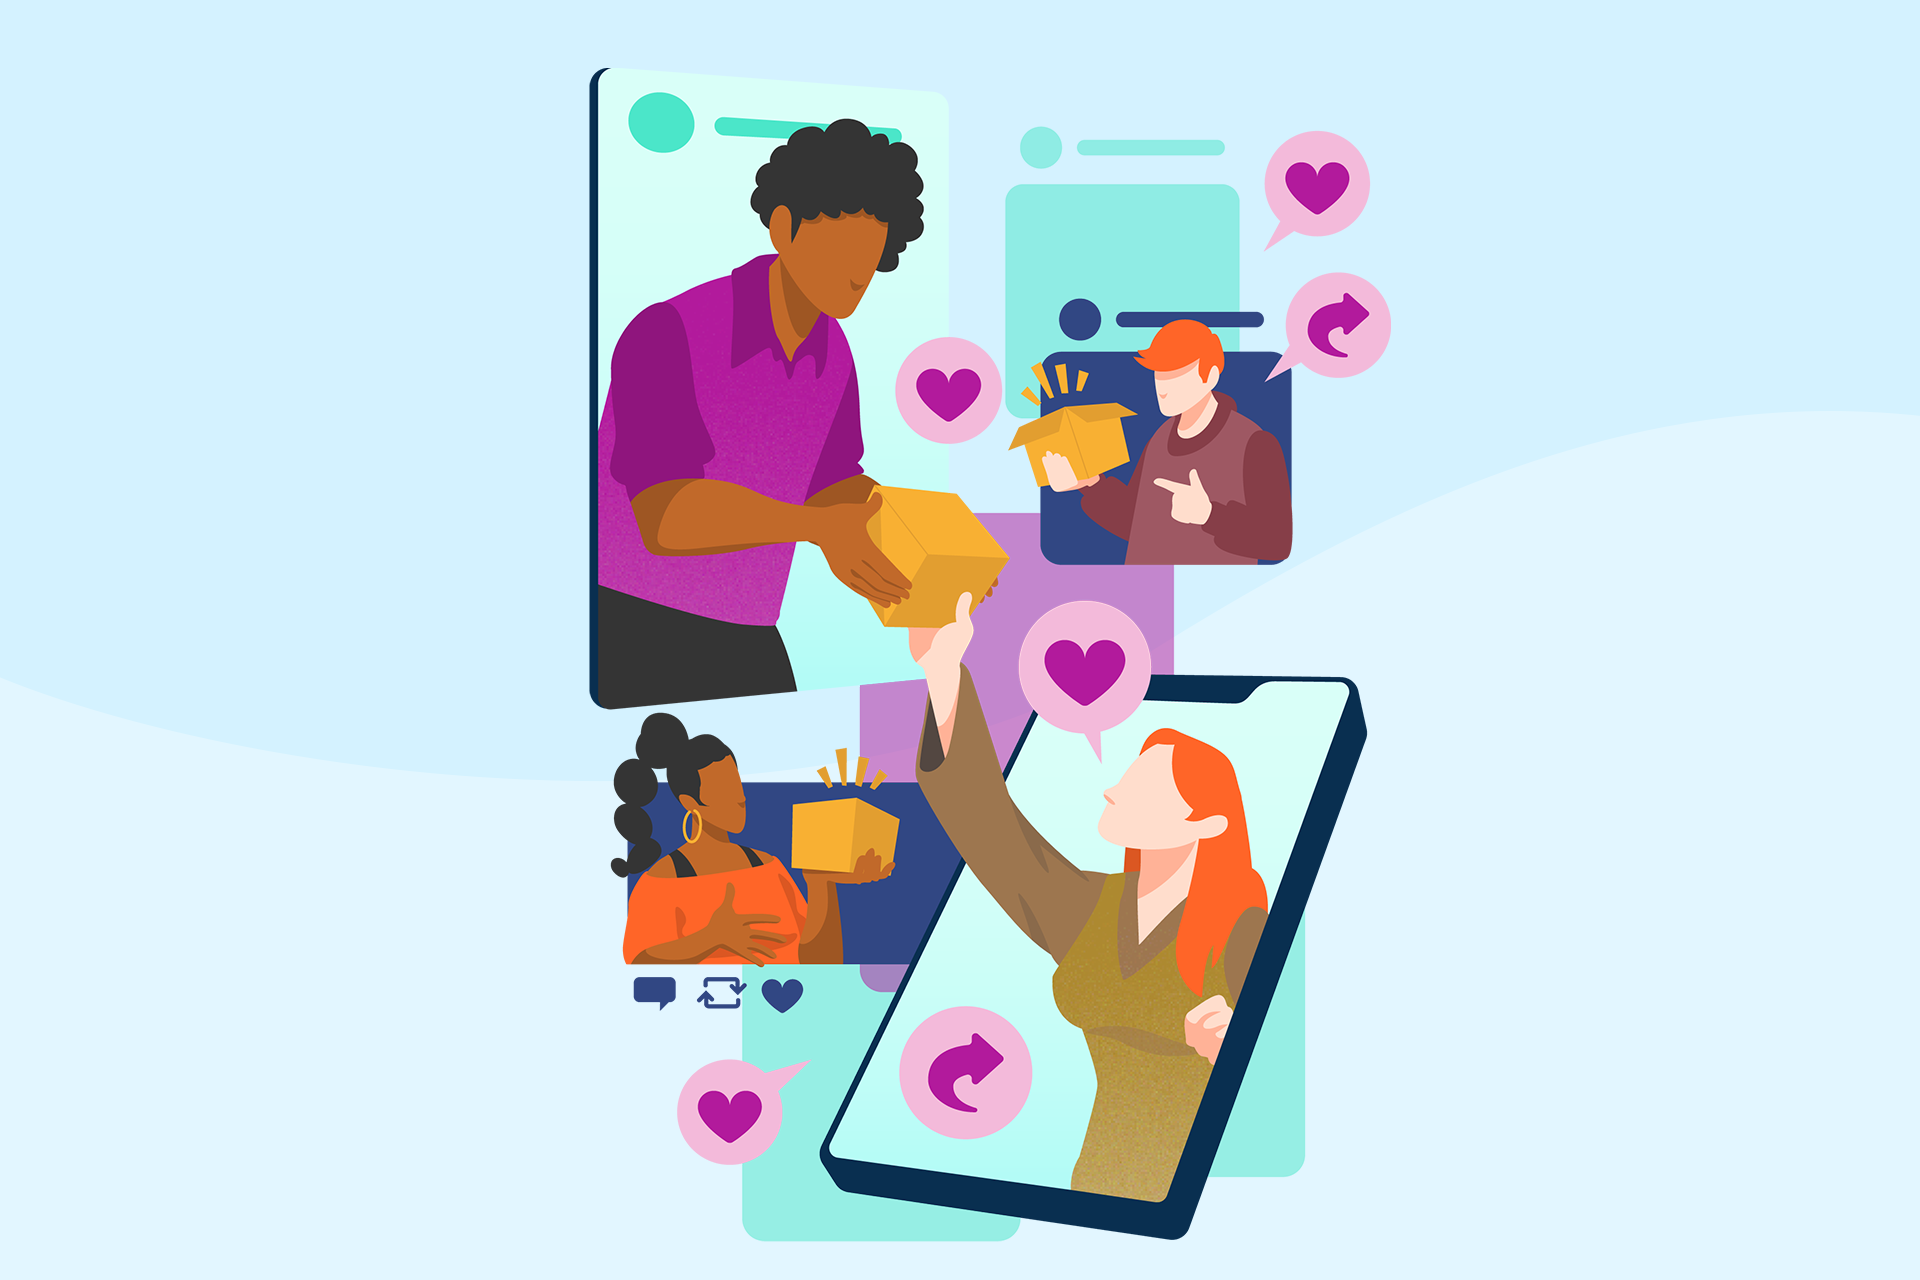 An illustration showing four people within the phone screens that are holding boxes that they are discussing with one another. These type of product reviews are referred to as user-generated content when shared through when done through social media. 